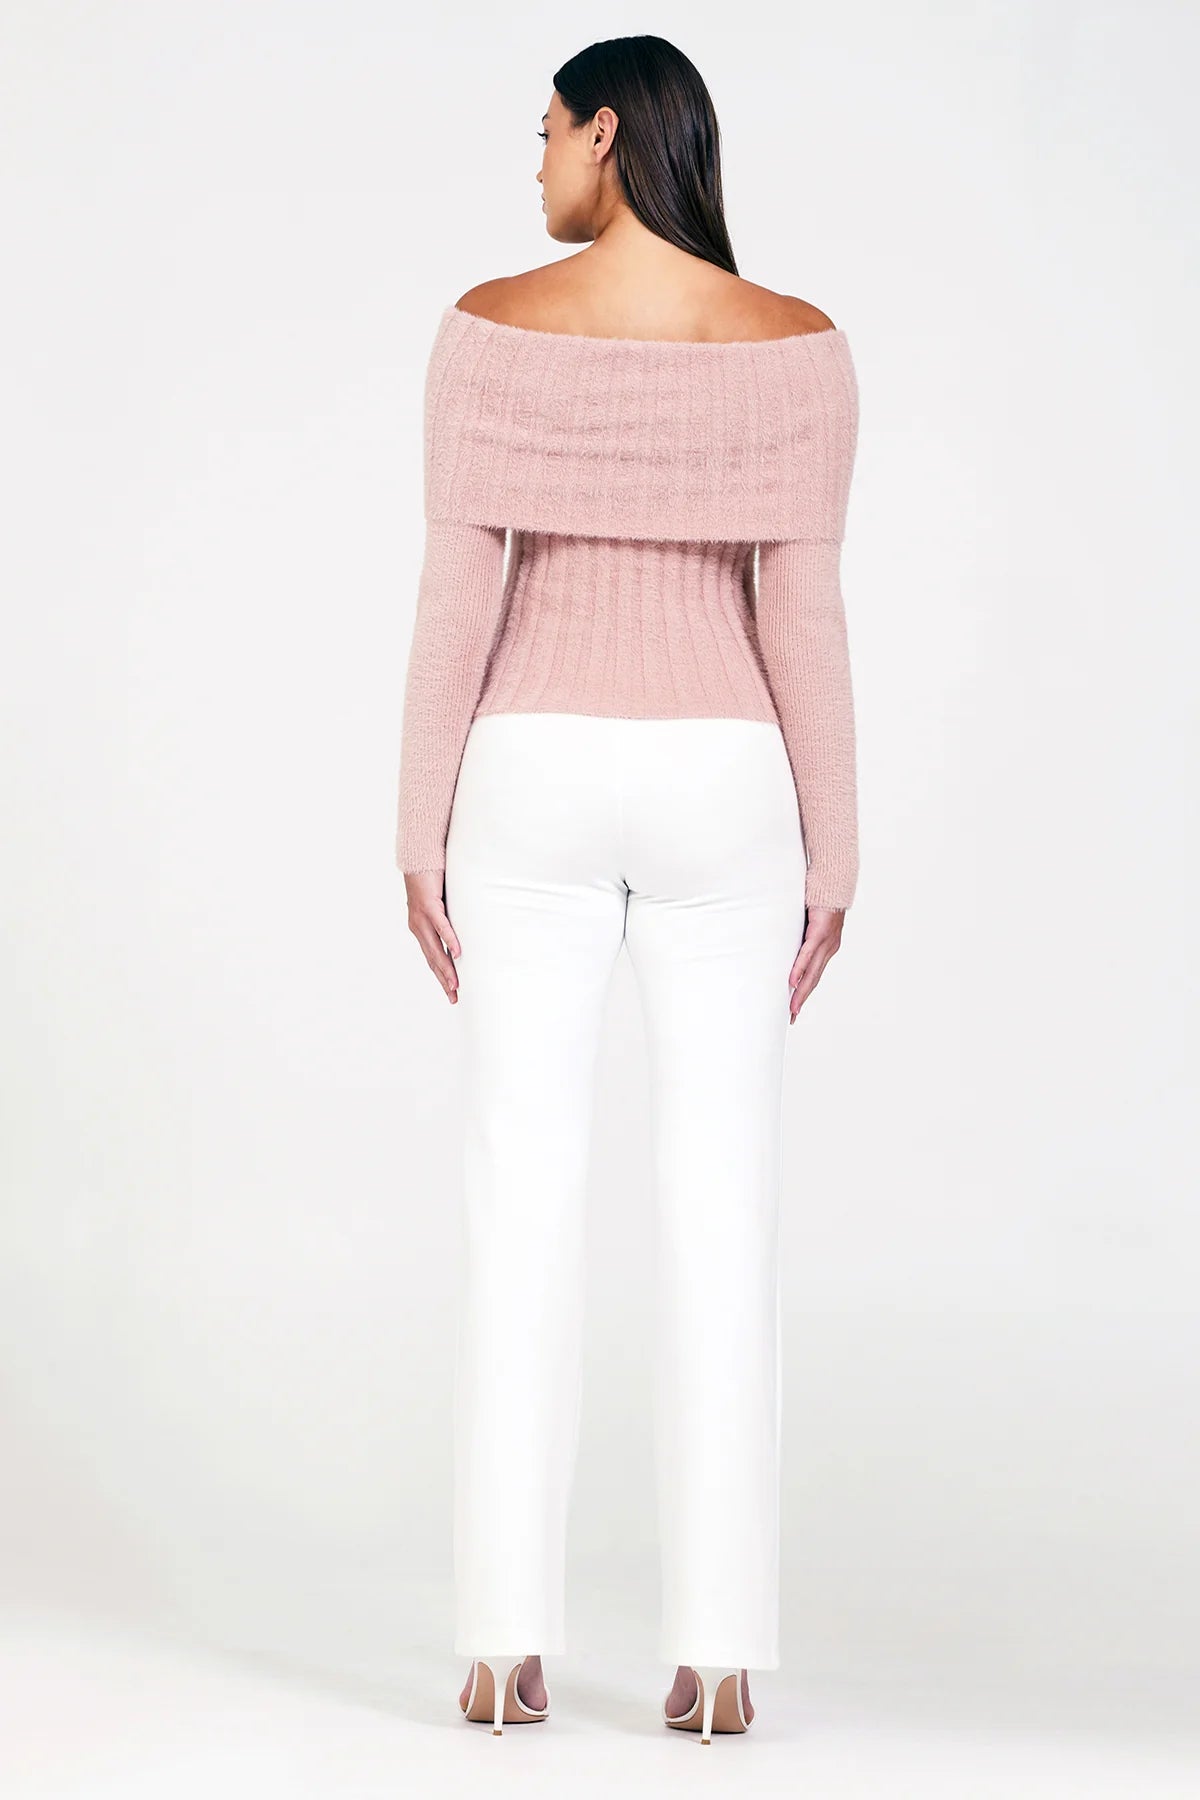 Tores Sweater Top Blush - Bailey 44